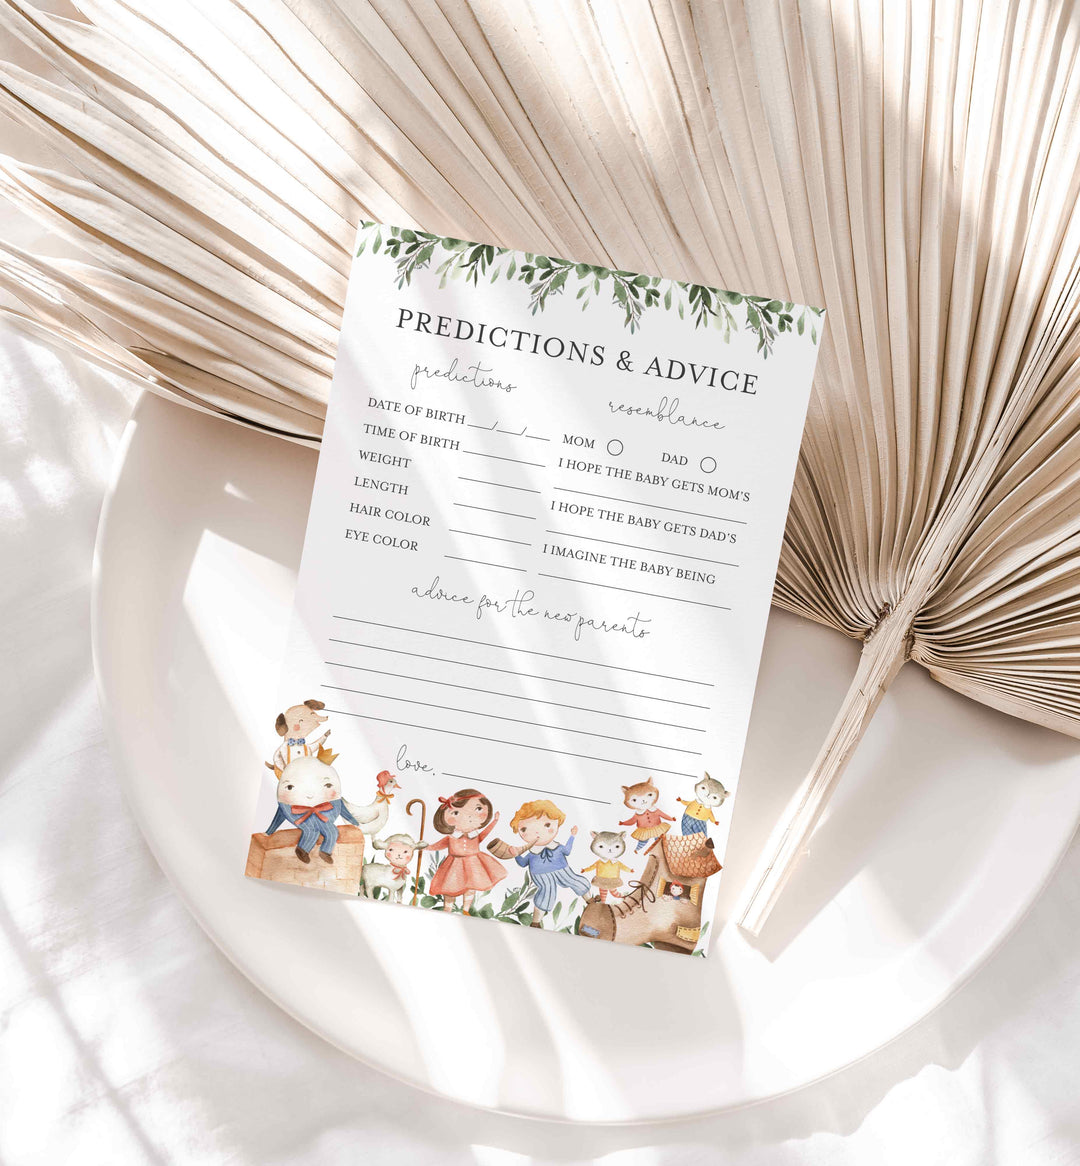 Nursery Rhymes Baby Shower Predictions and Advice Printable